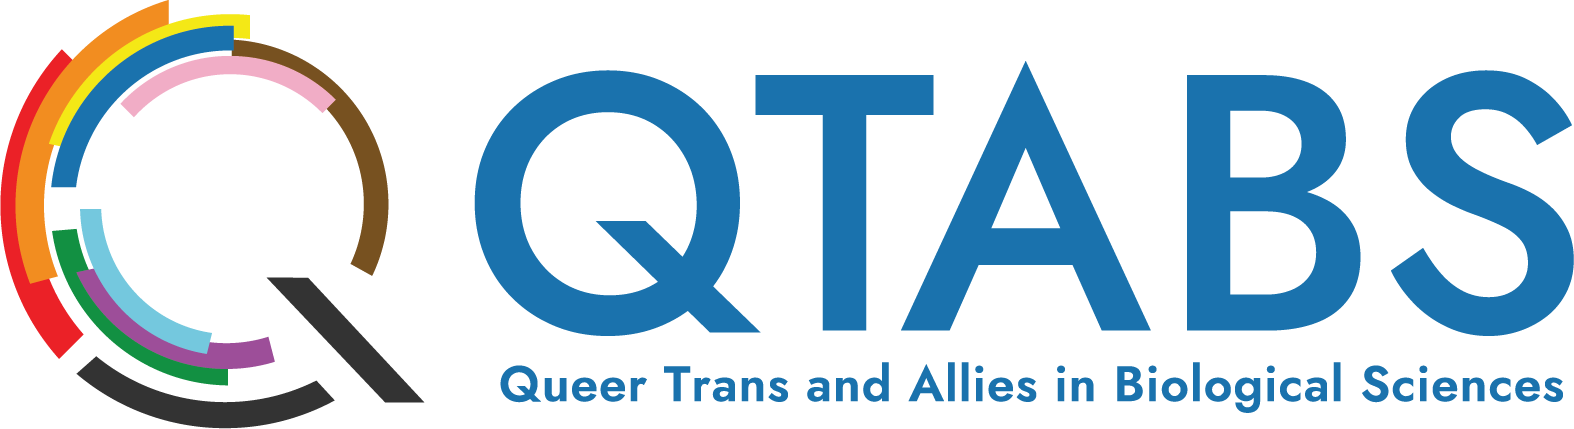 Queer Trans and Allies in Biological Sciences (QTABS)